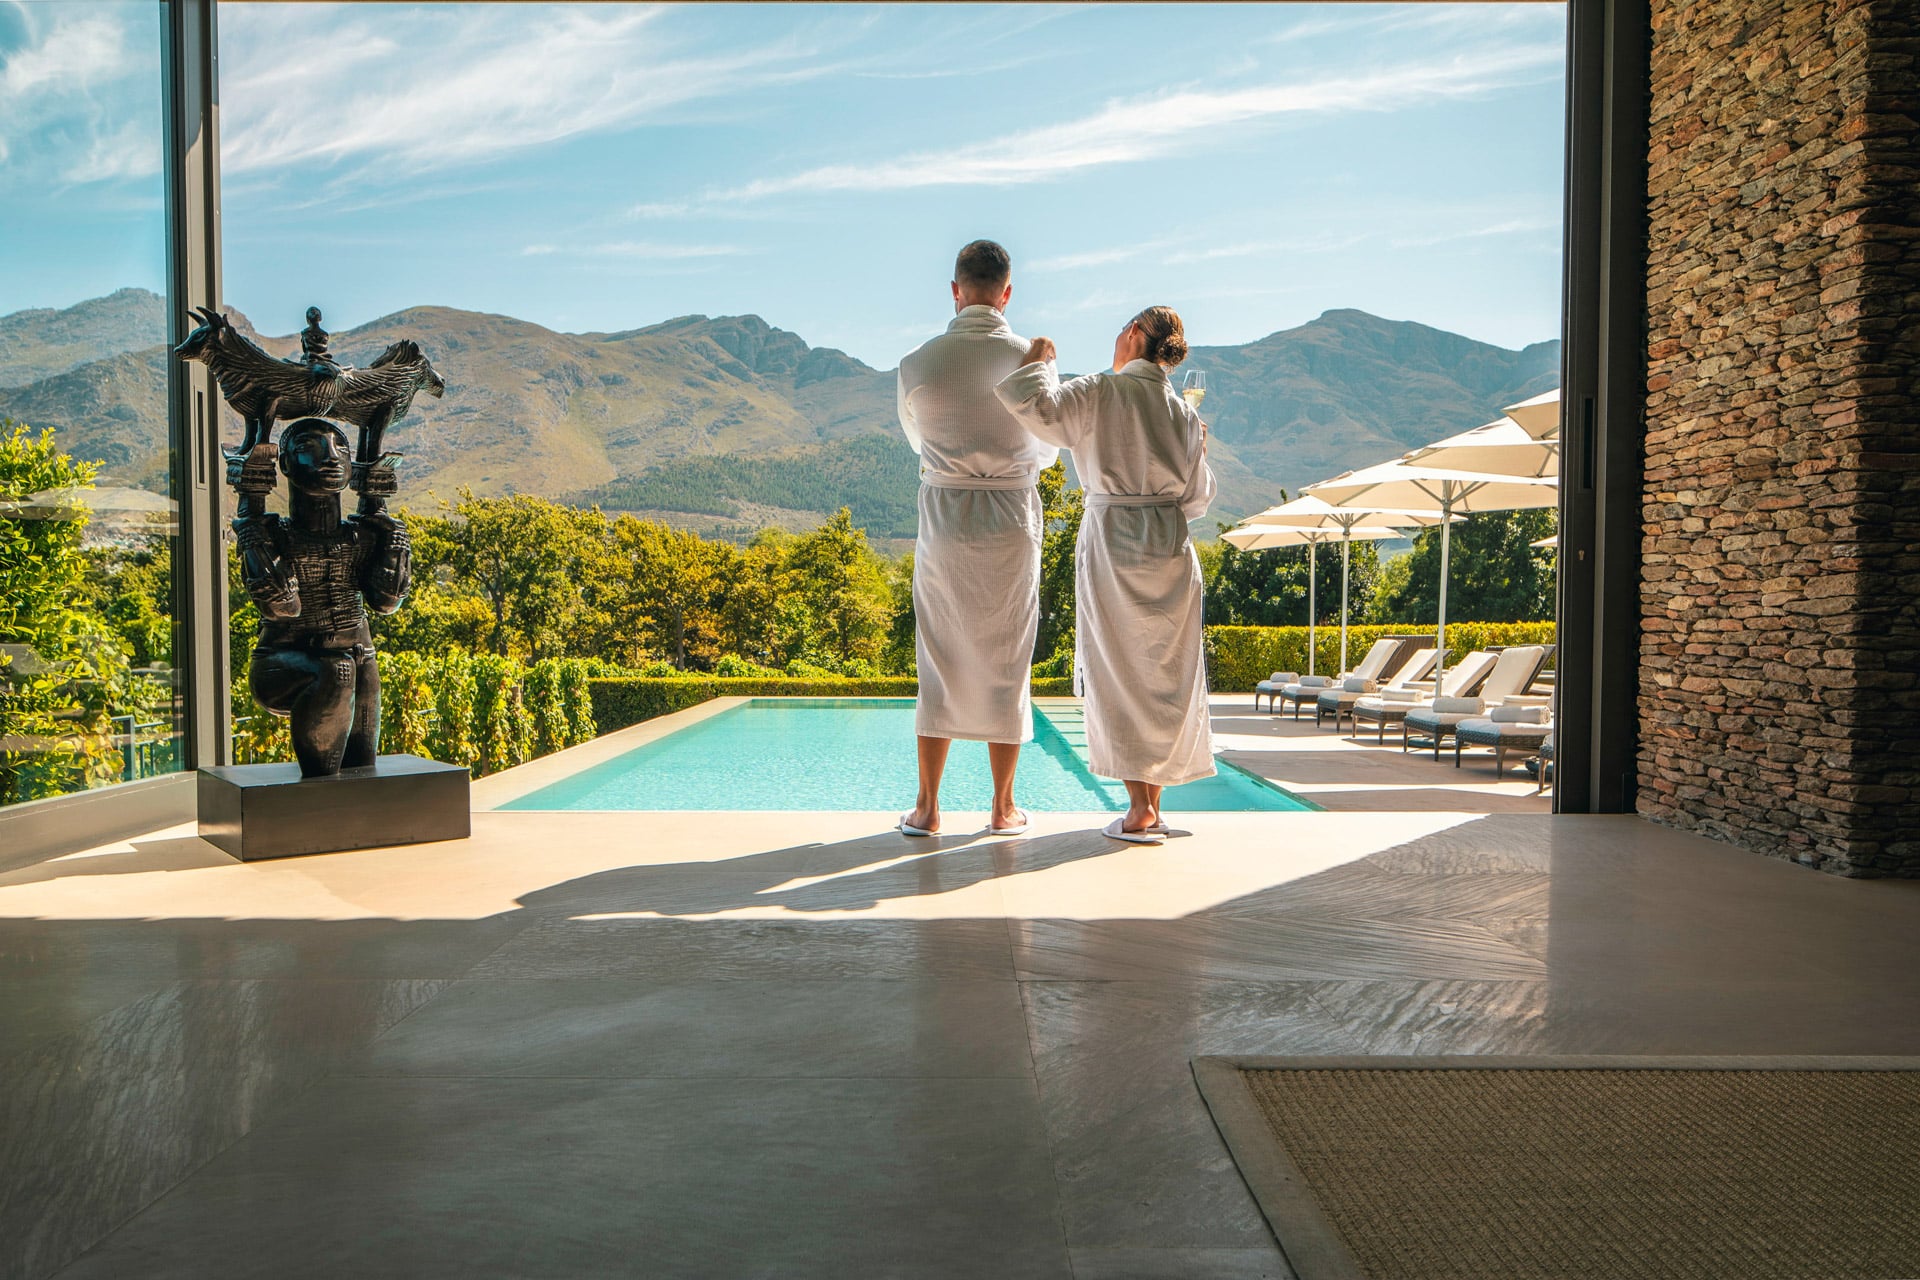 Treat yourself to a rejuvenating treatment at the Leeu Spa by Healing Earth - a relaxing activity to do during Christmas in South Africa.